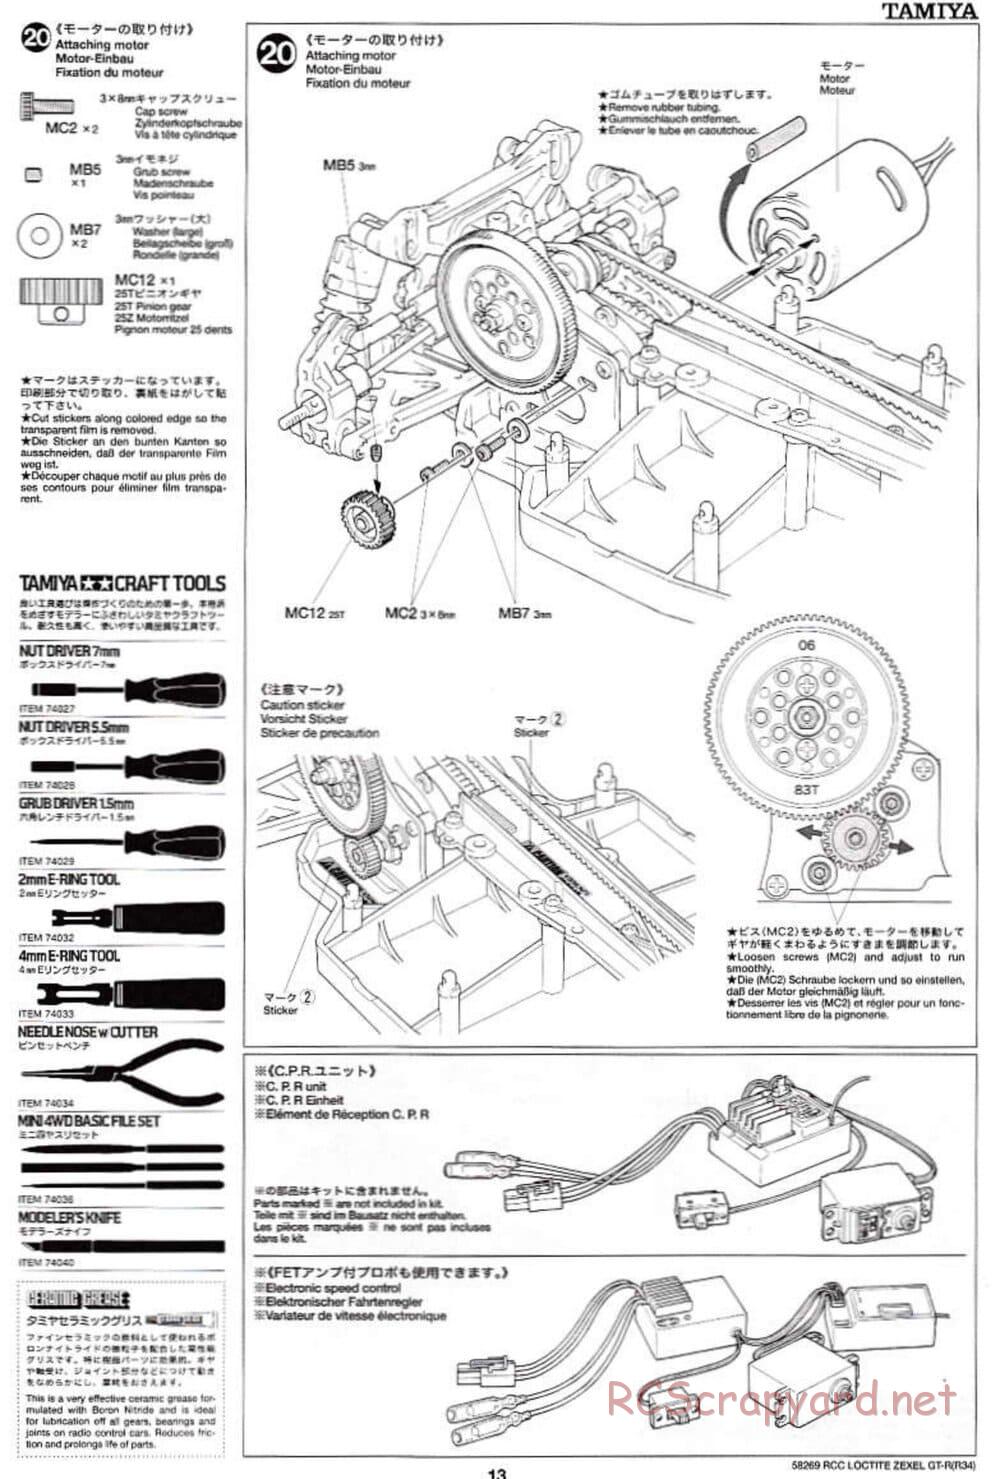 Tamiya - Loctite Zexel Skyline GT-R (R34) - TA-04 Chassis - Manual - Page 13